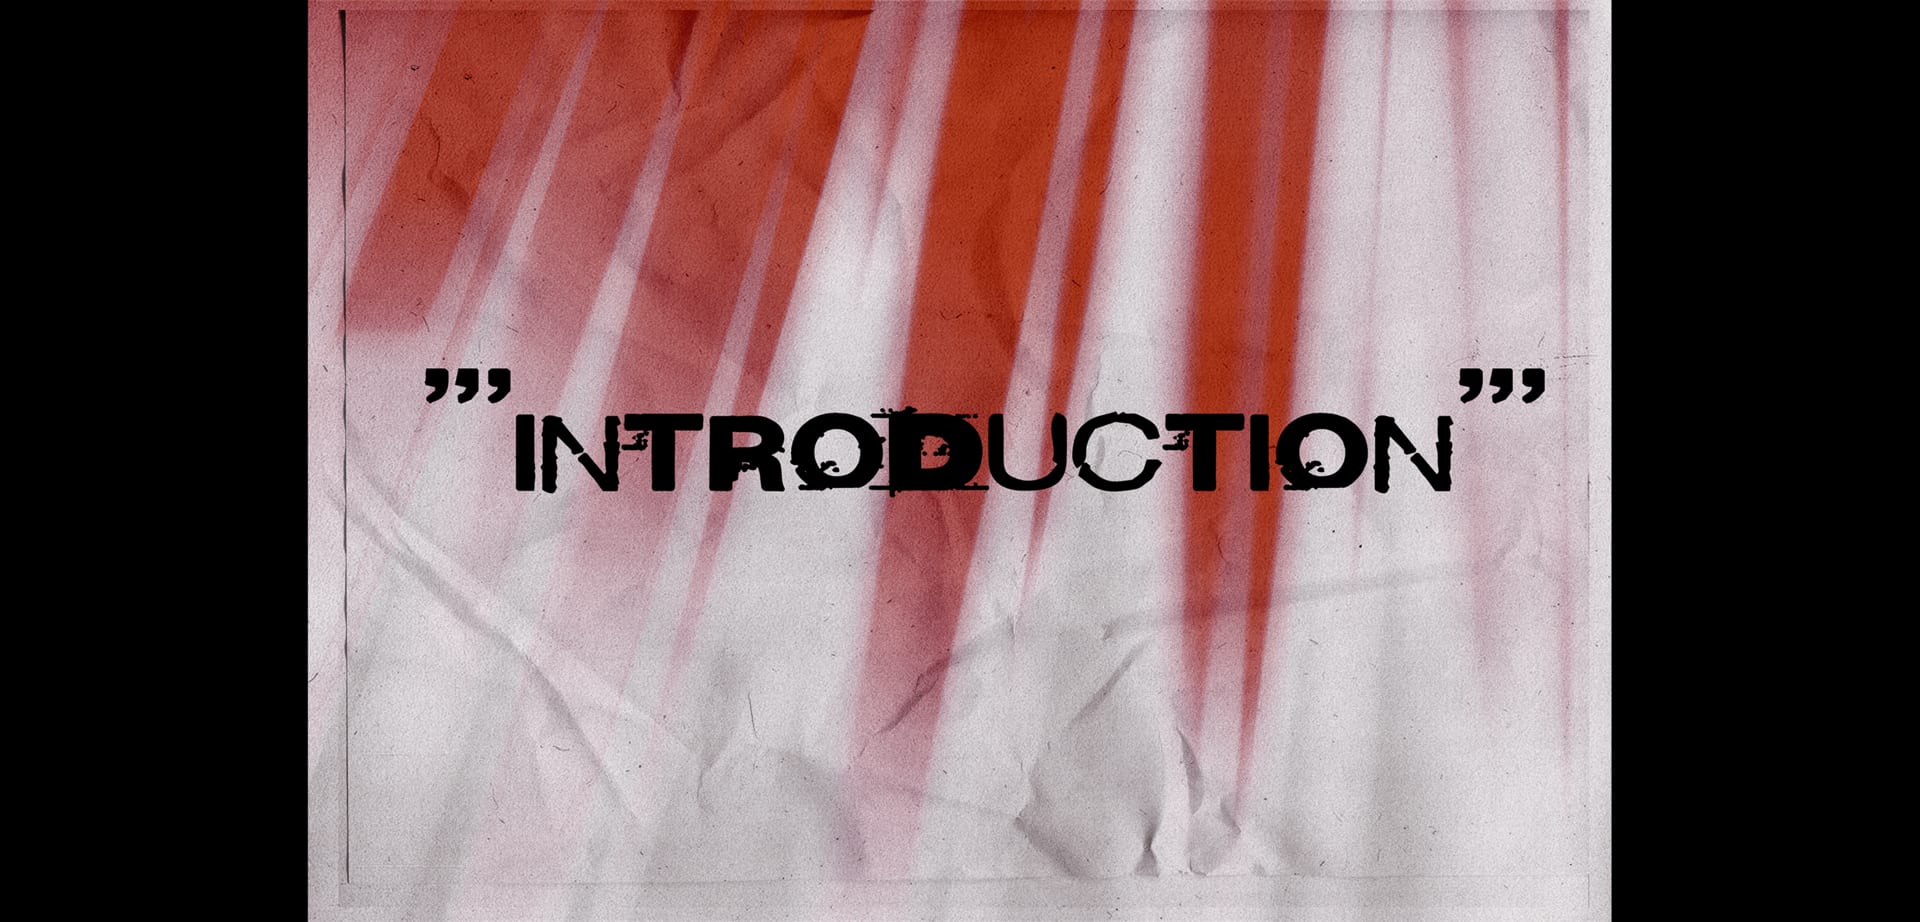 ***# INTRODUCTION #***